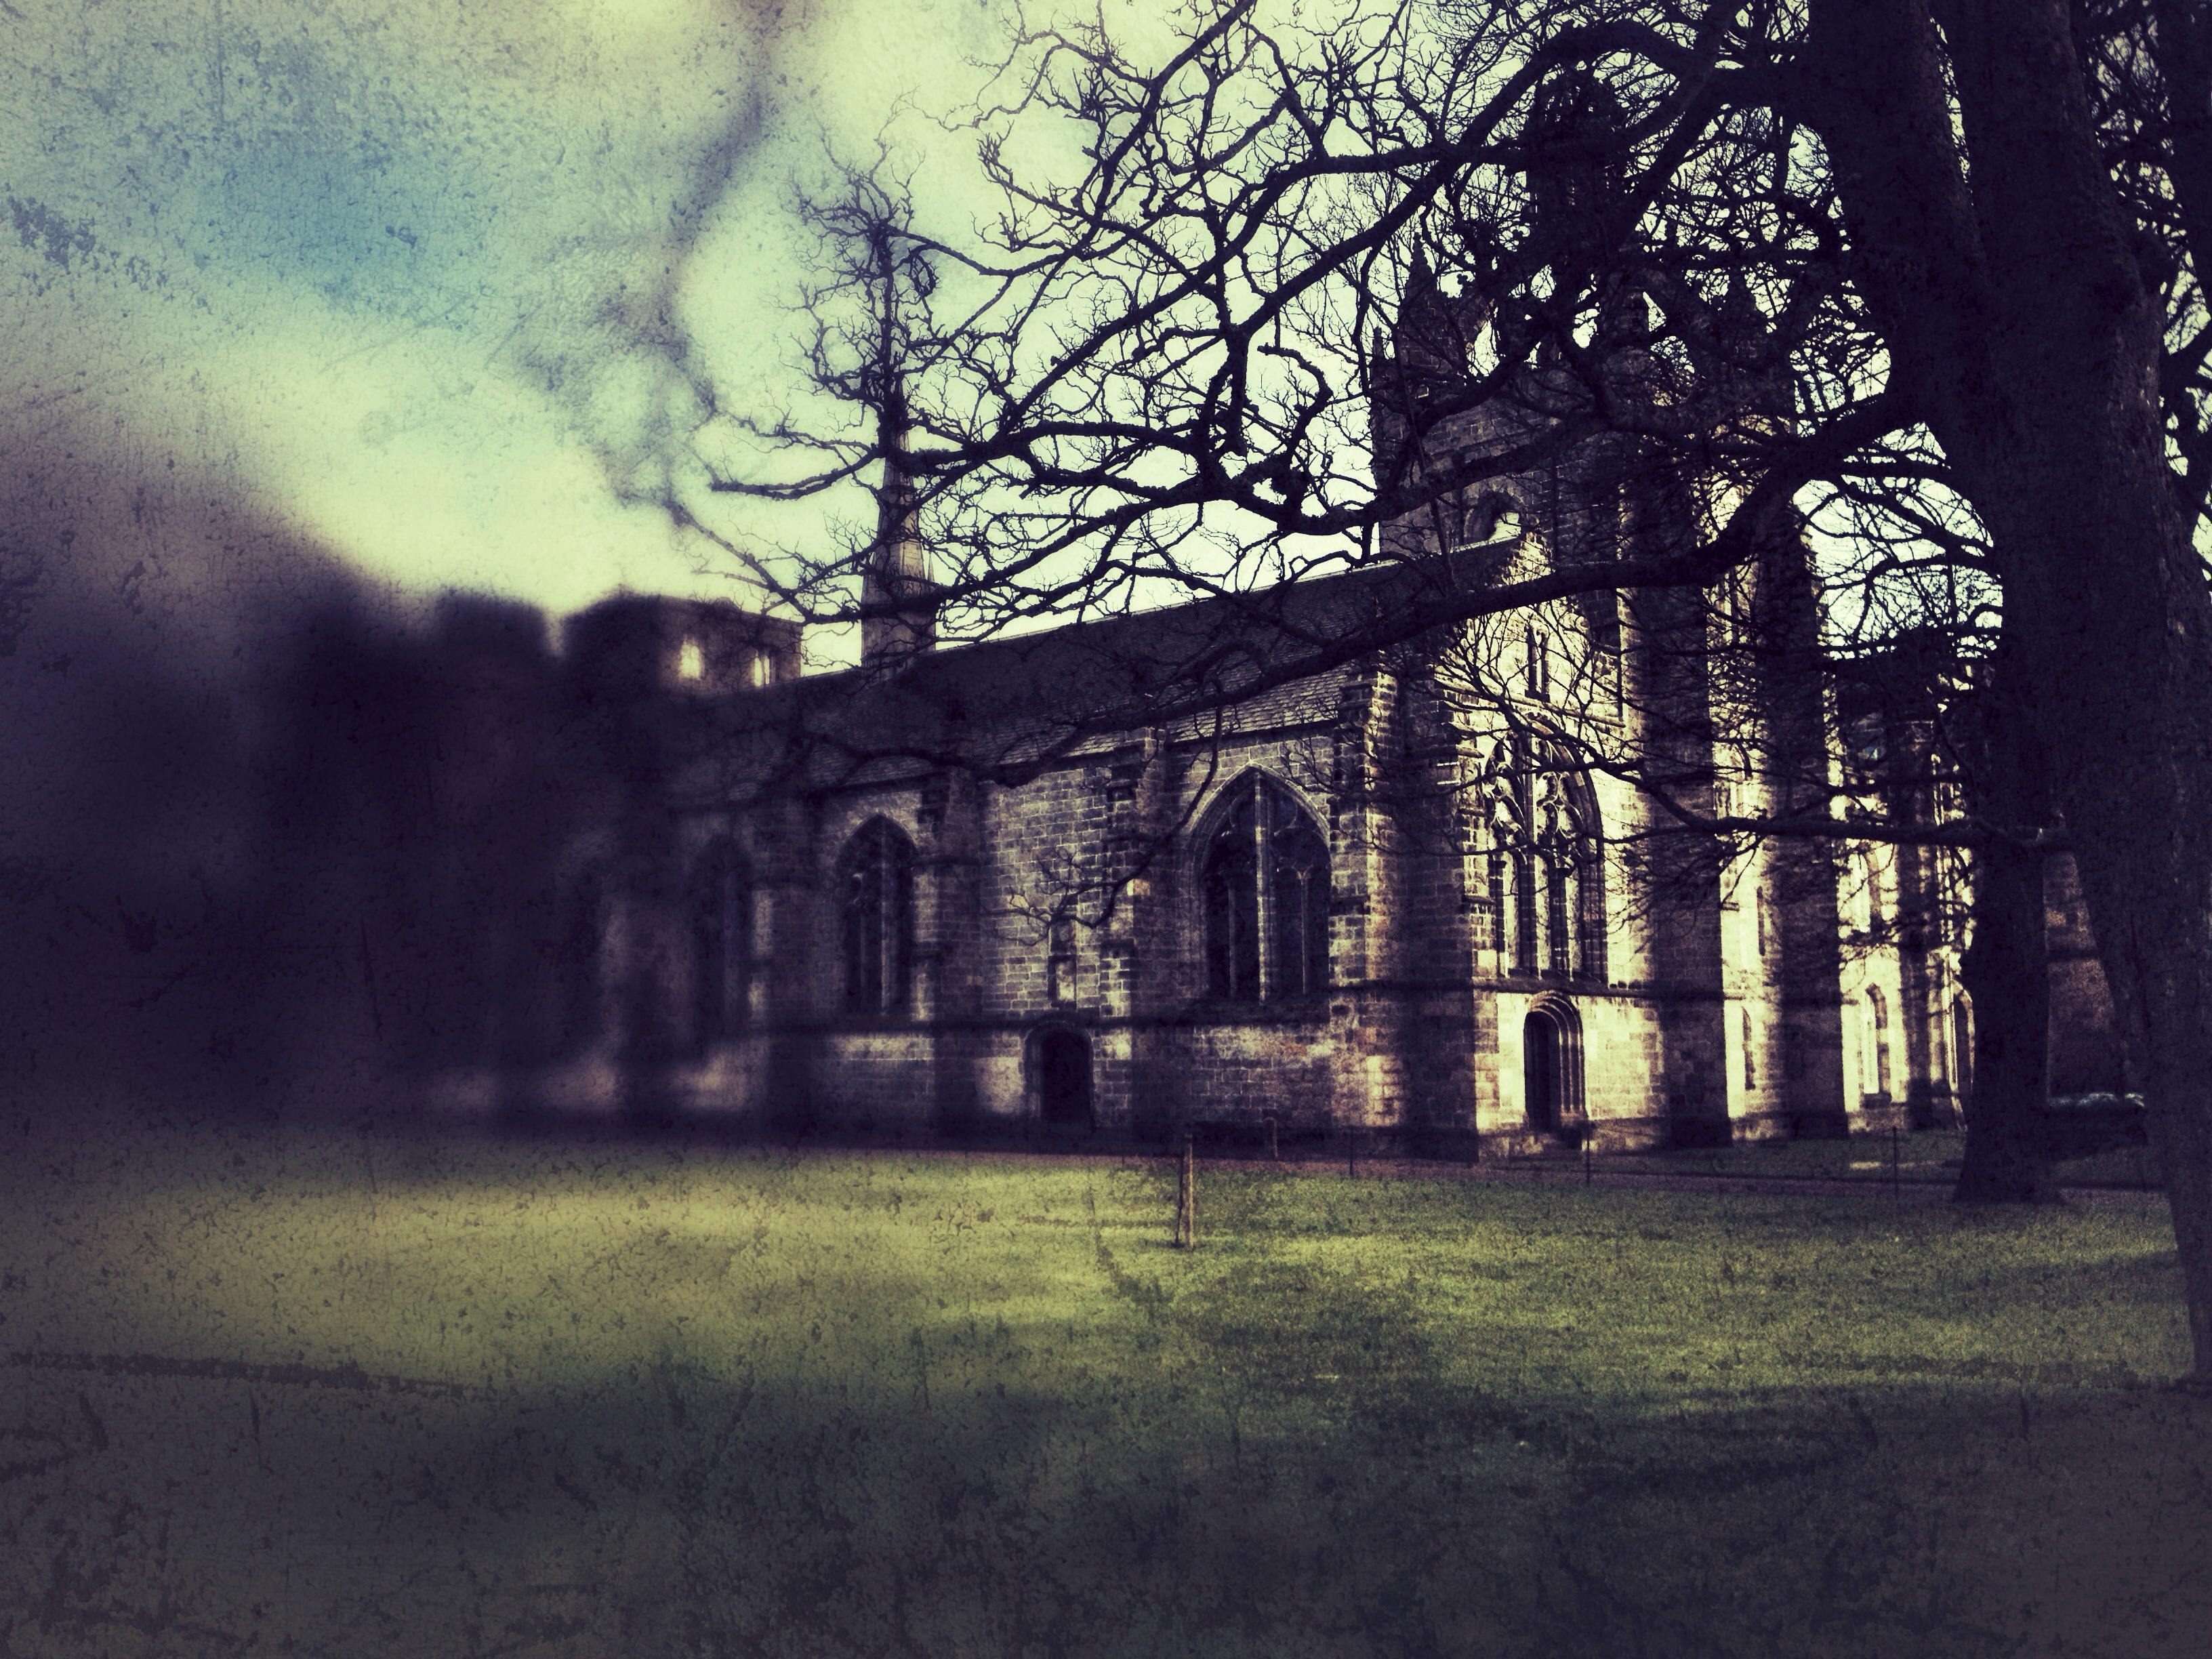 Photograph: Kings College Tree